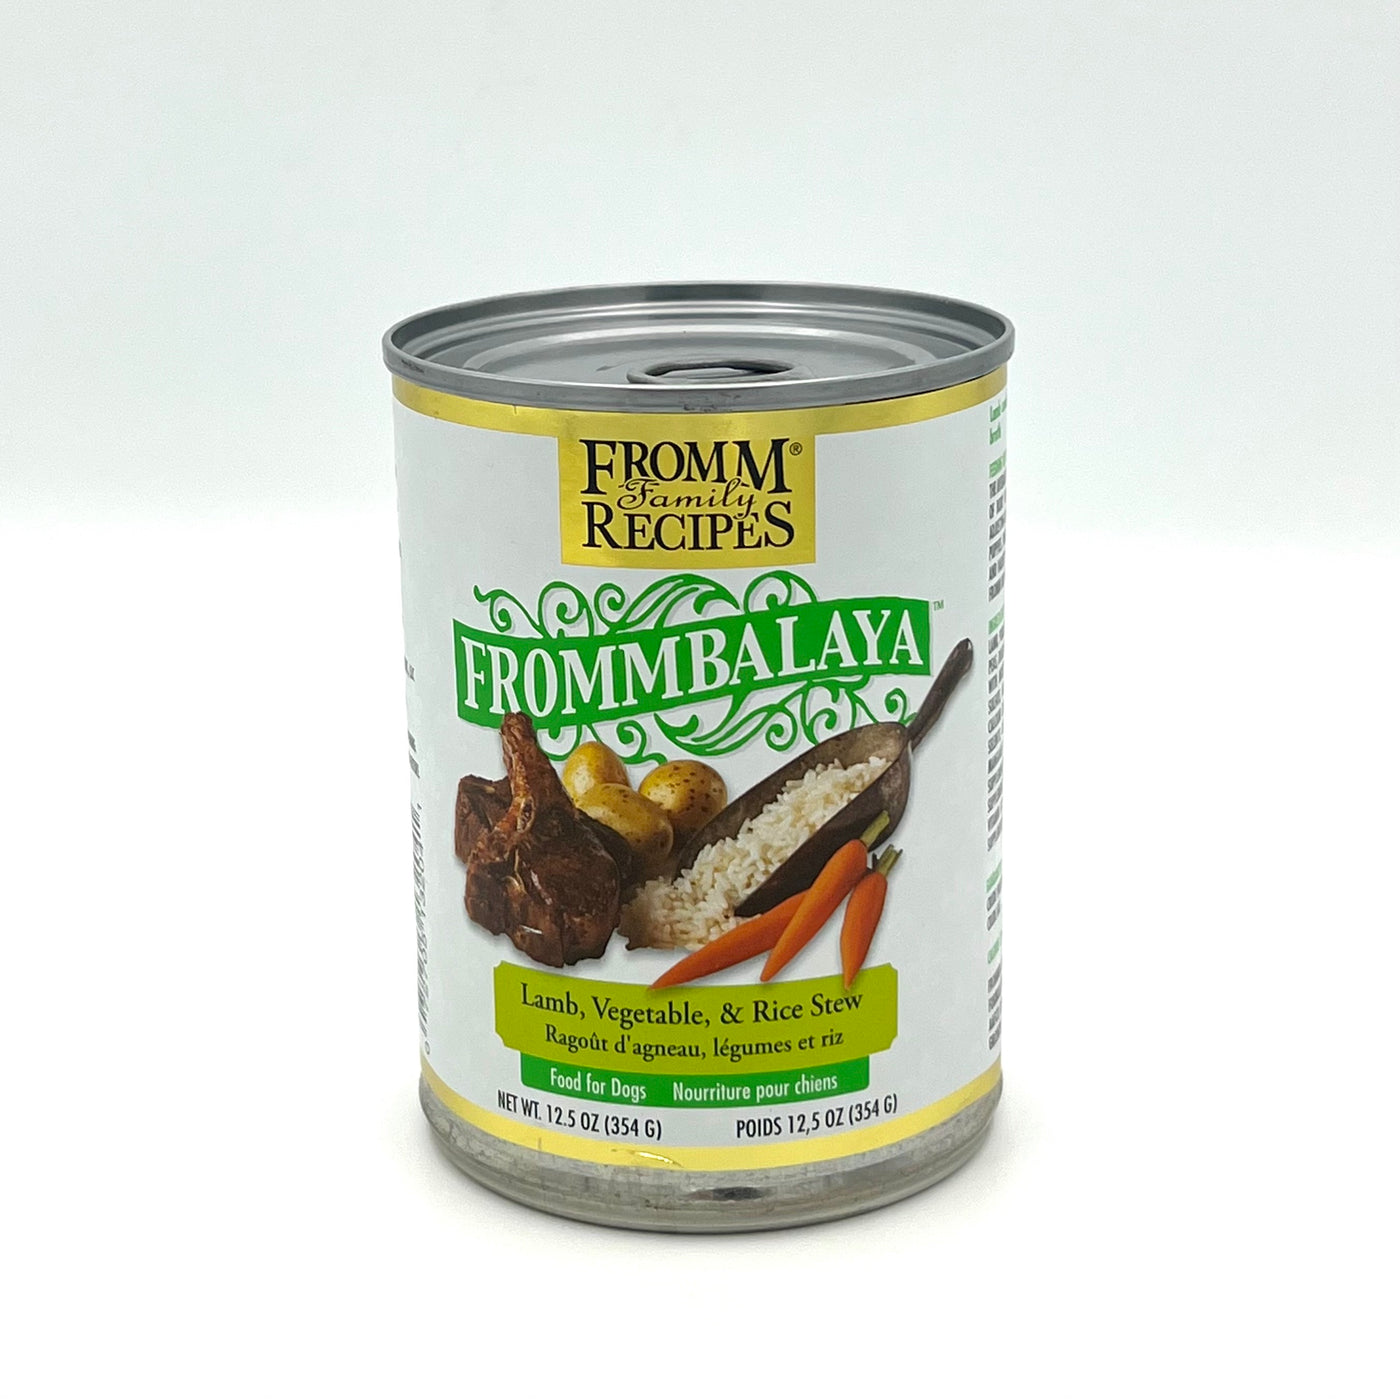 Fromm Frommbalaya Lamb, Vegetable & Rice Stew 12.5 oz can